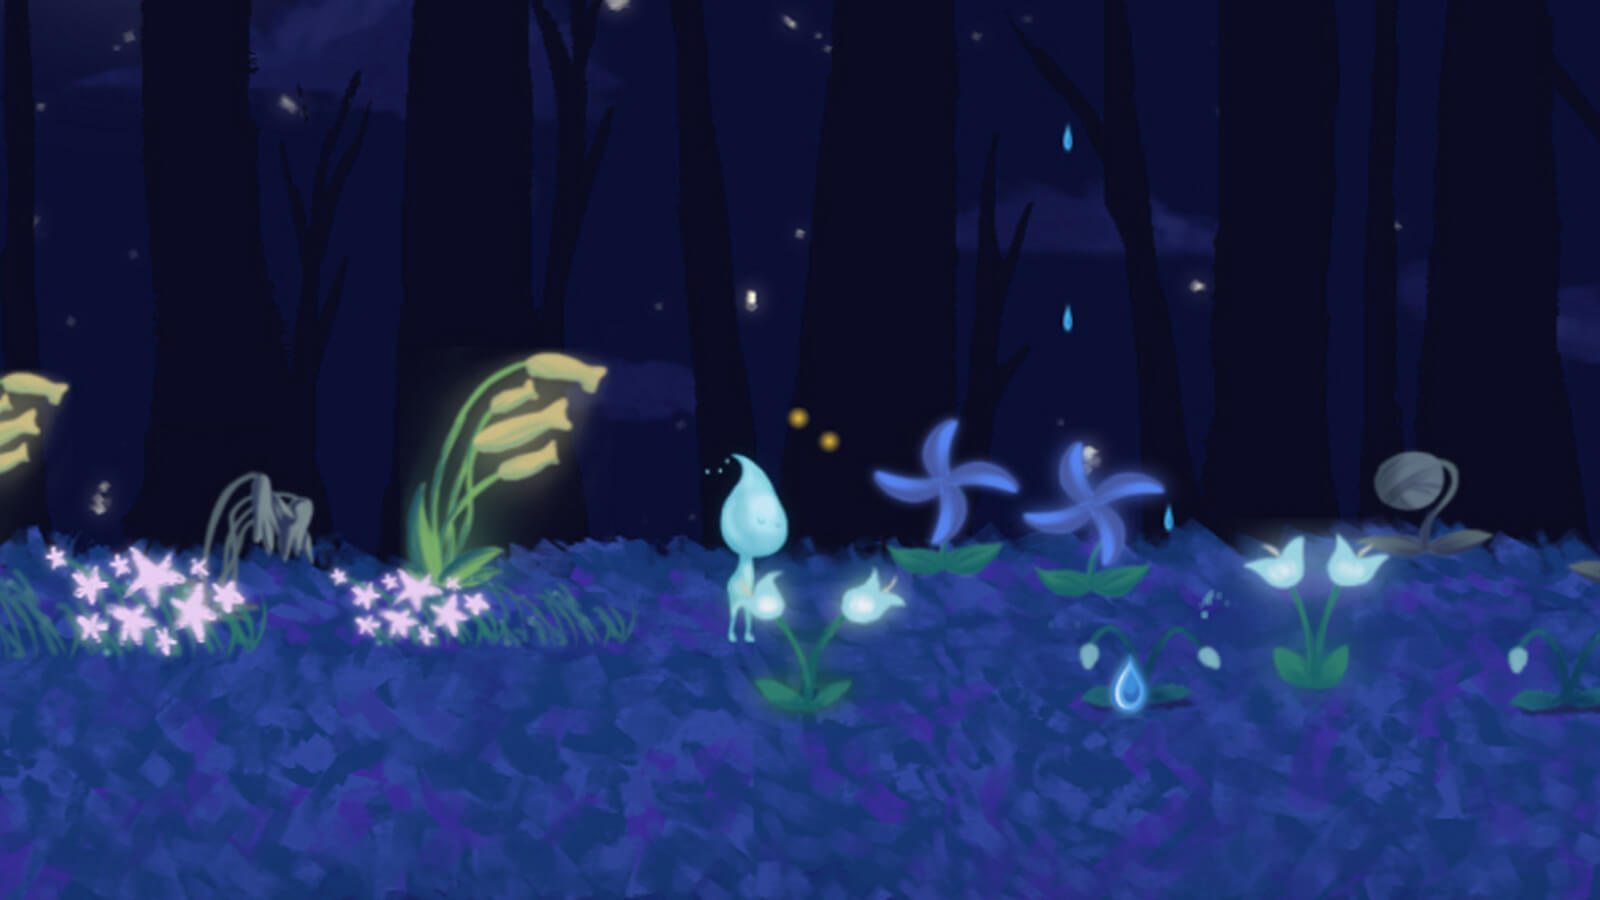 Douse, the raindrop main character of the game, walks among the flowers.